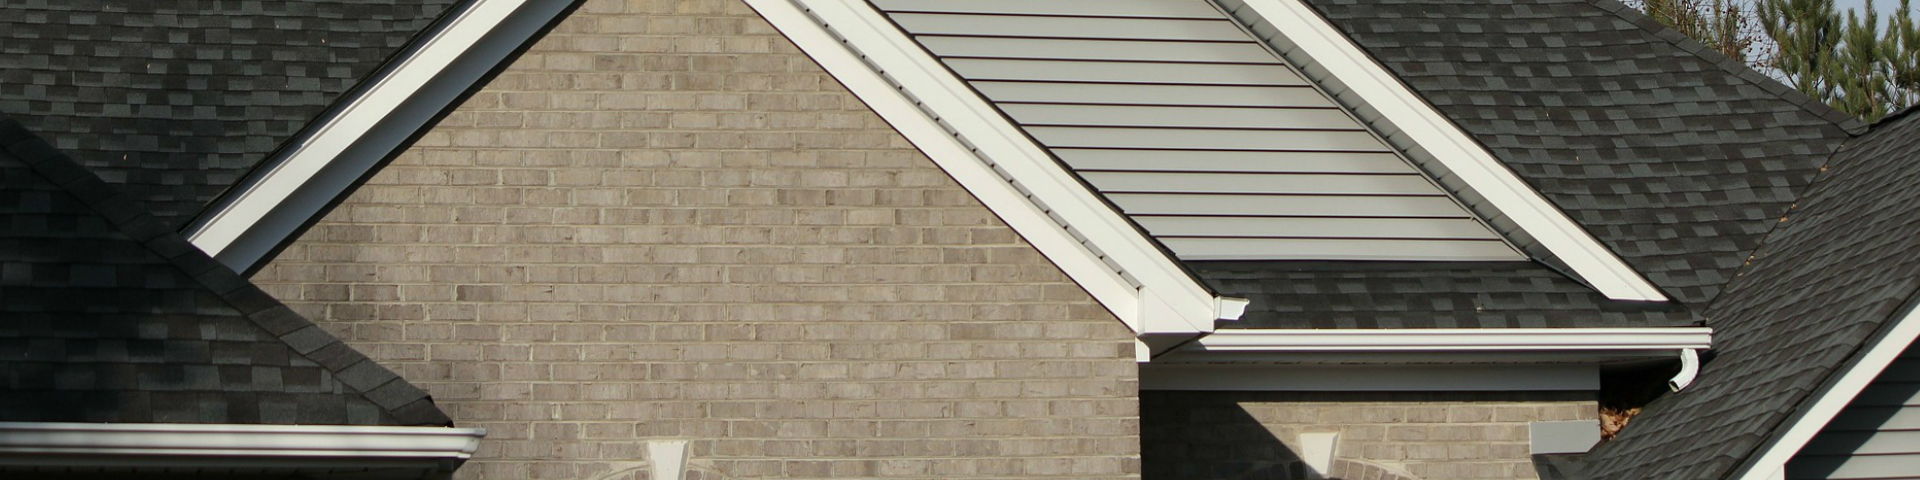 home Gutter Repair Westchester ny